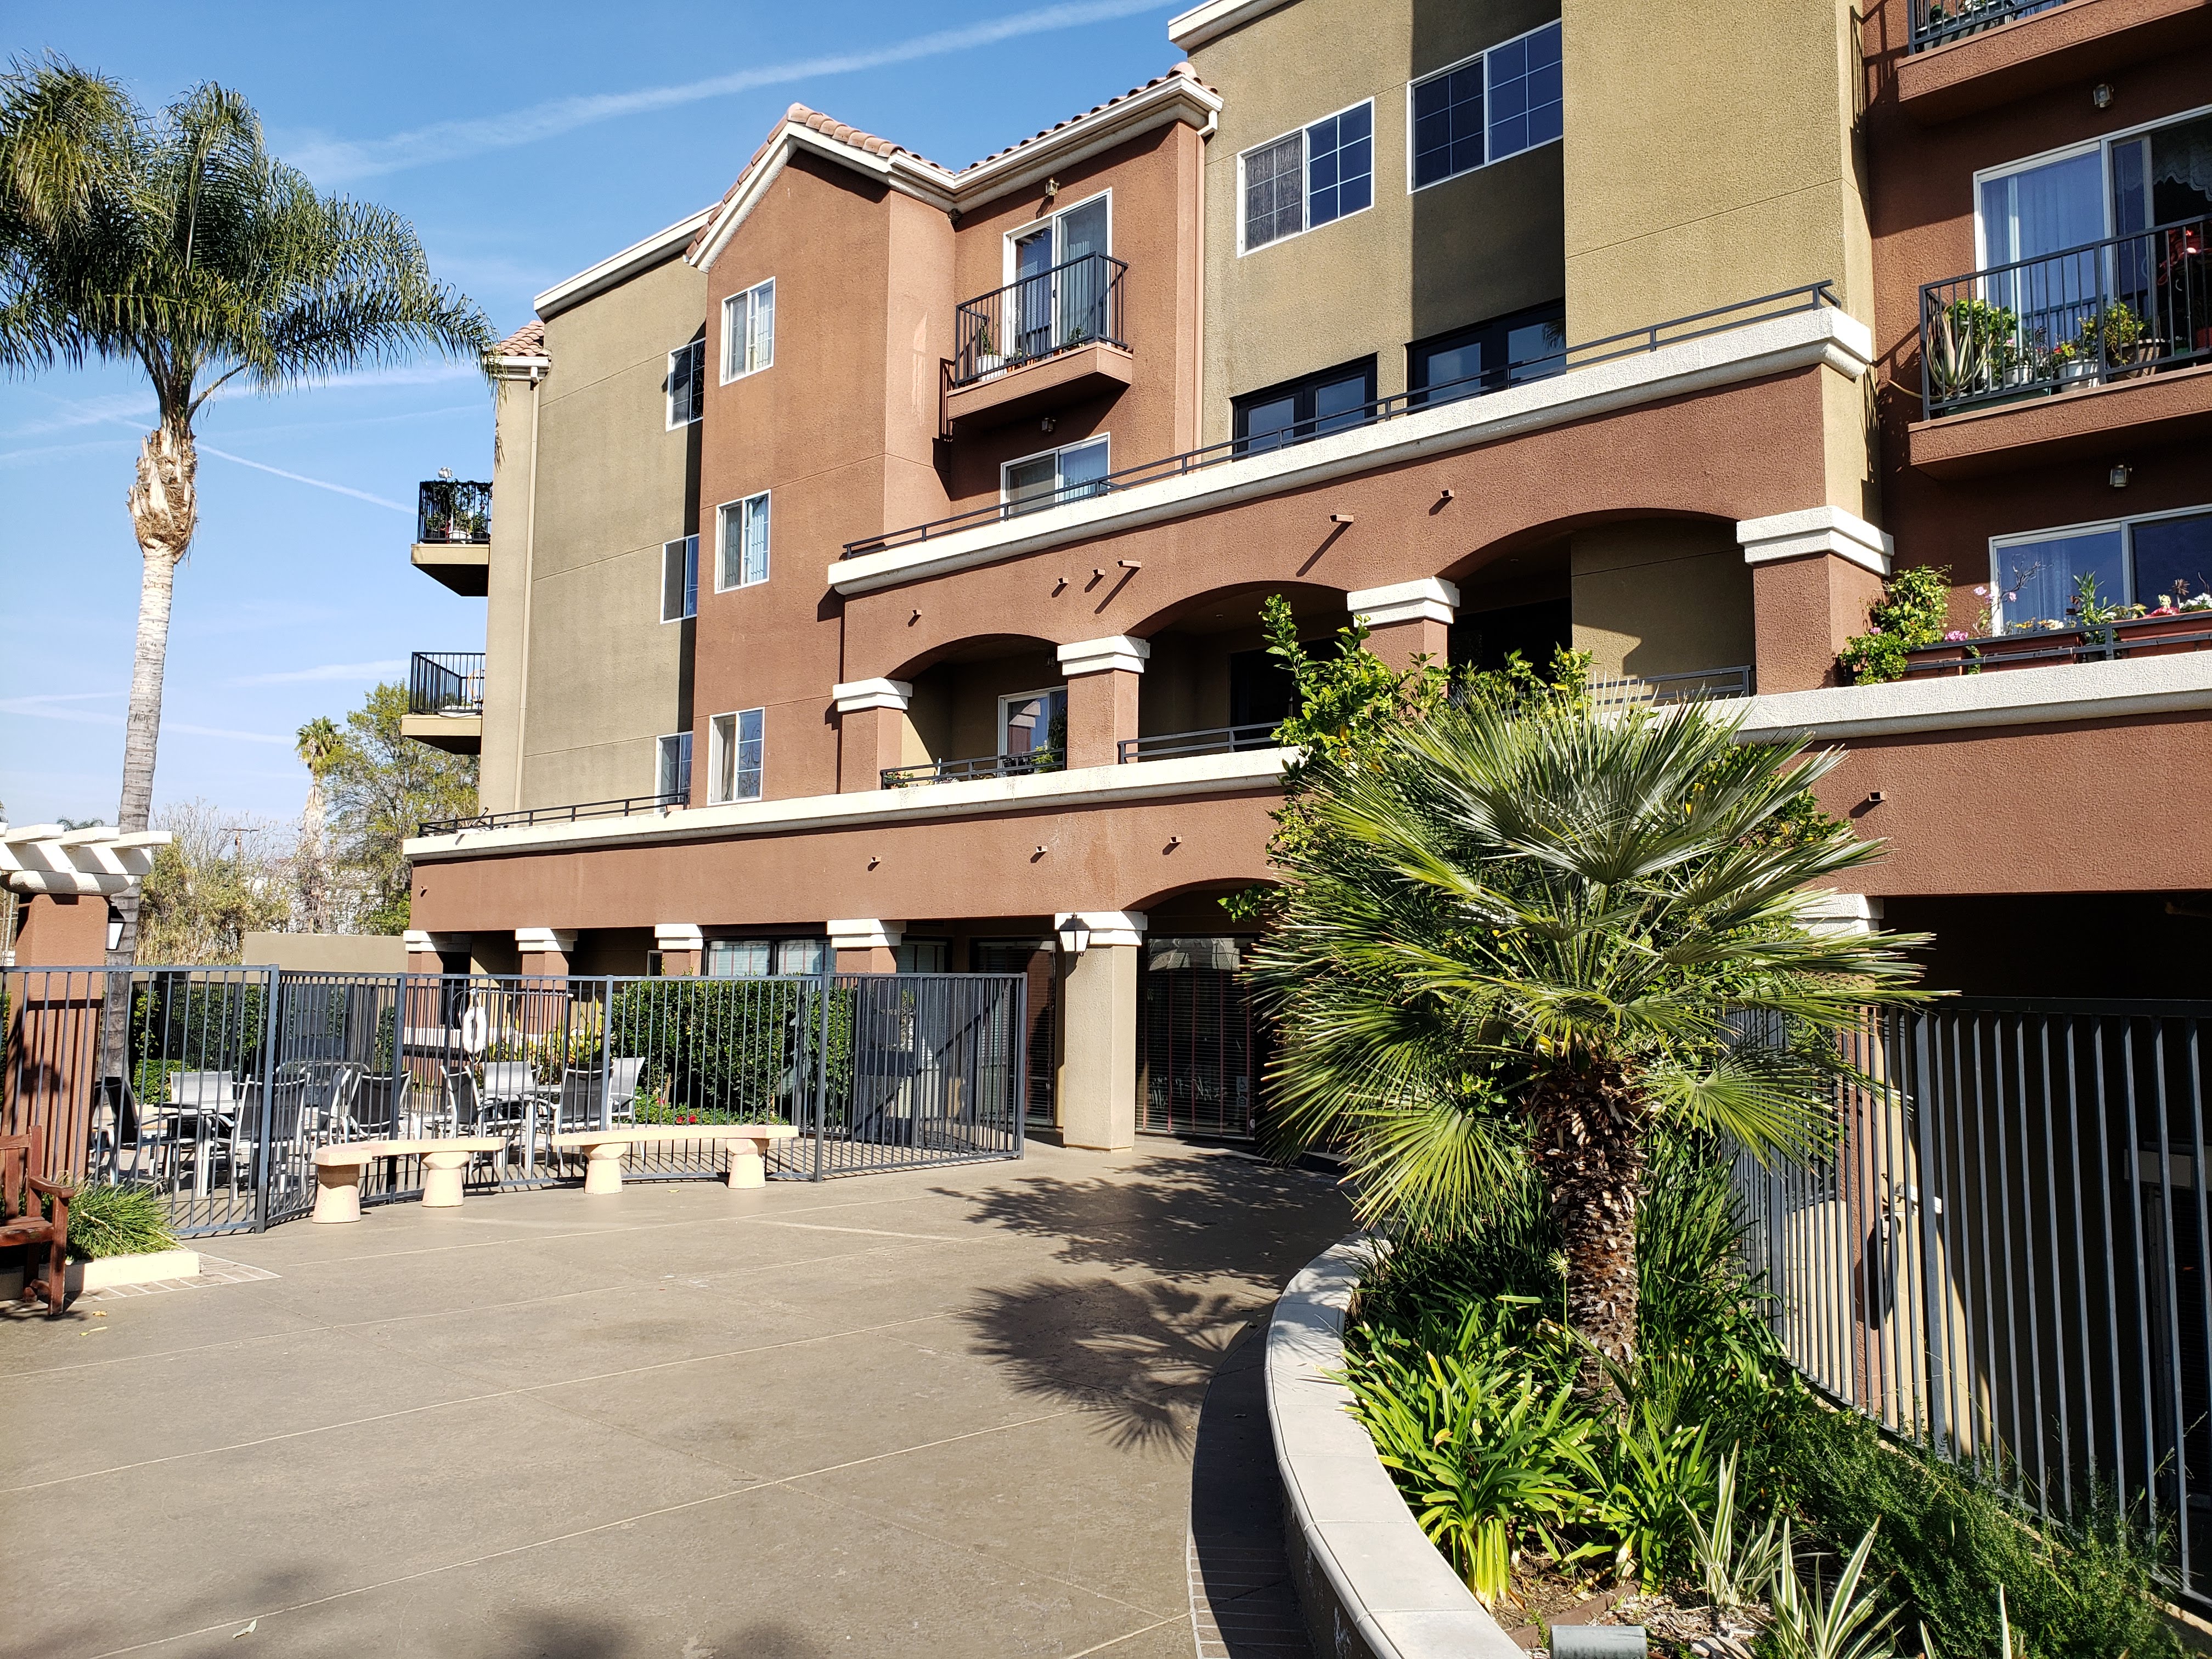 Image of vintage crossing senior apartments. Image includes gated outside spa area with pool side seating. large walkway with raised flower beds to right of walkway. walk way leads up to building. several balconys with flowers and miscellaneous objects pl